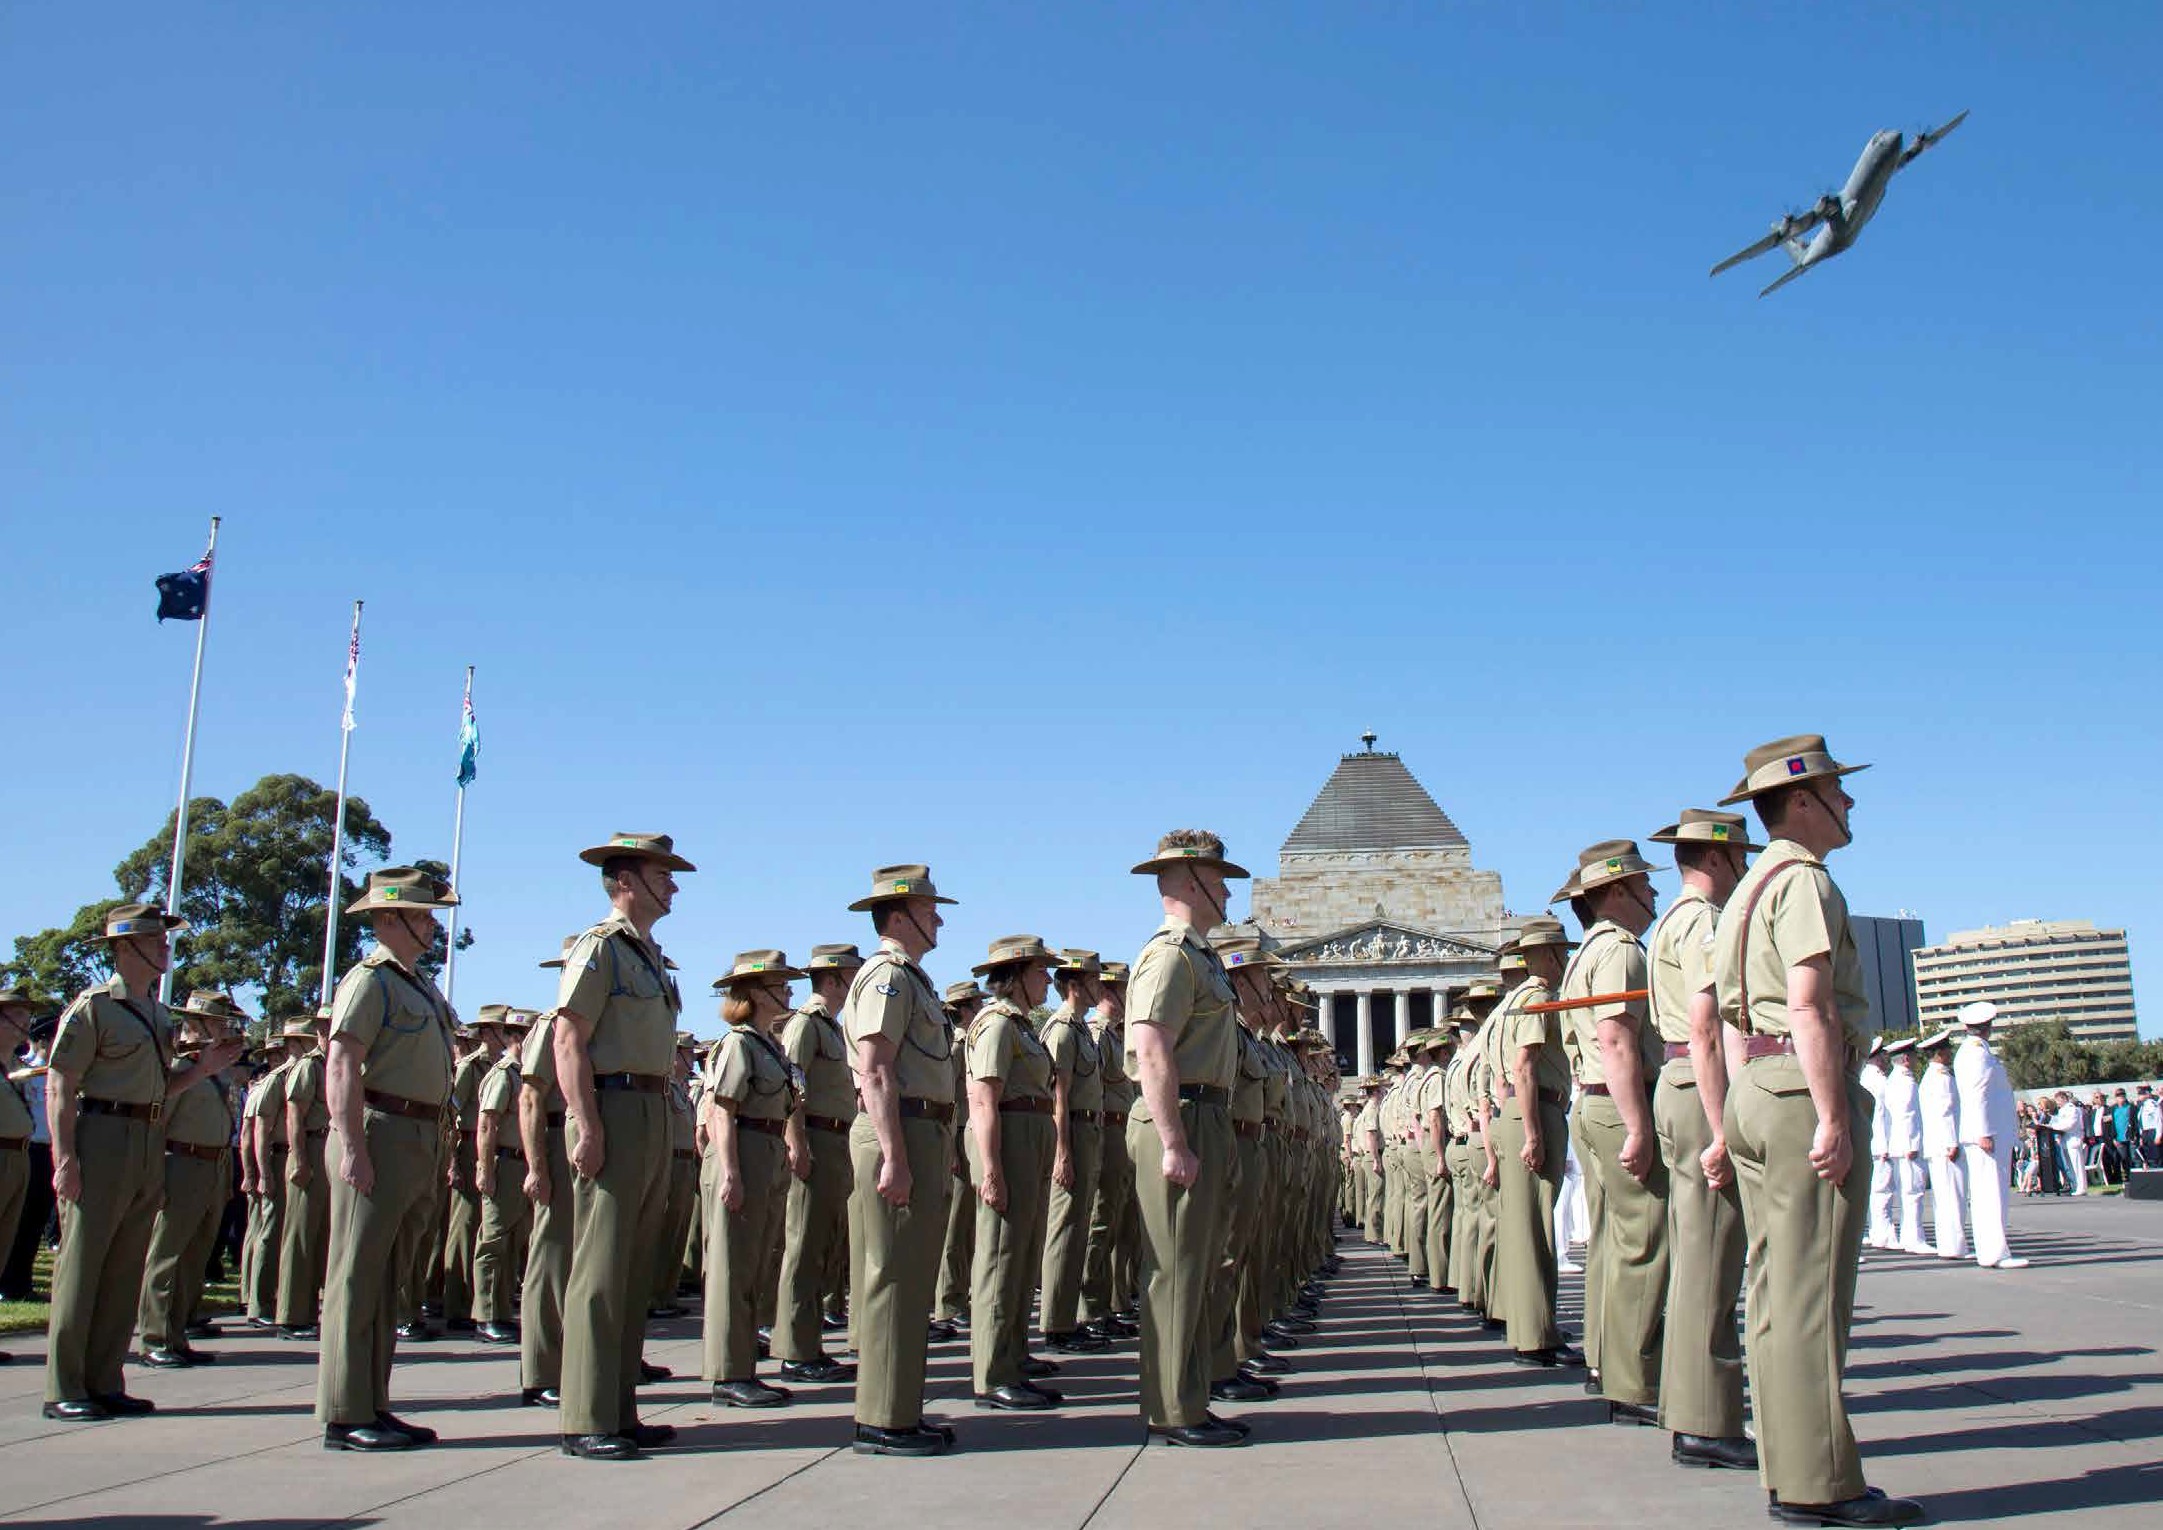 soldiers in formation outside the shrine of rememberance with a plane flying overhead.